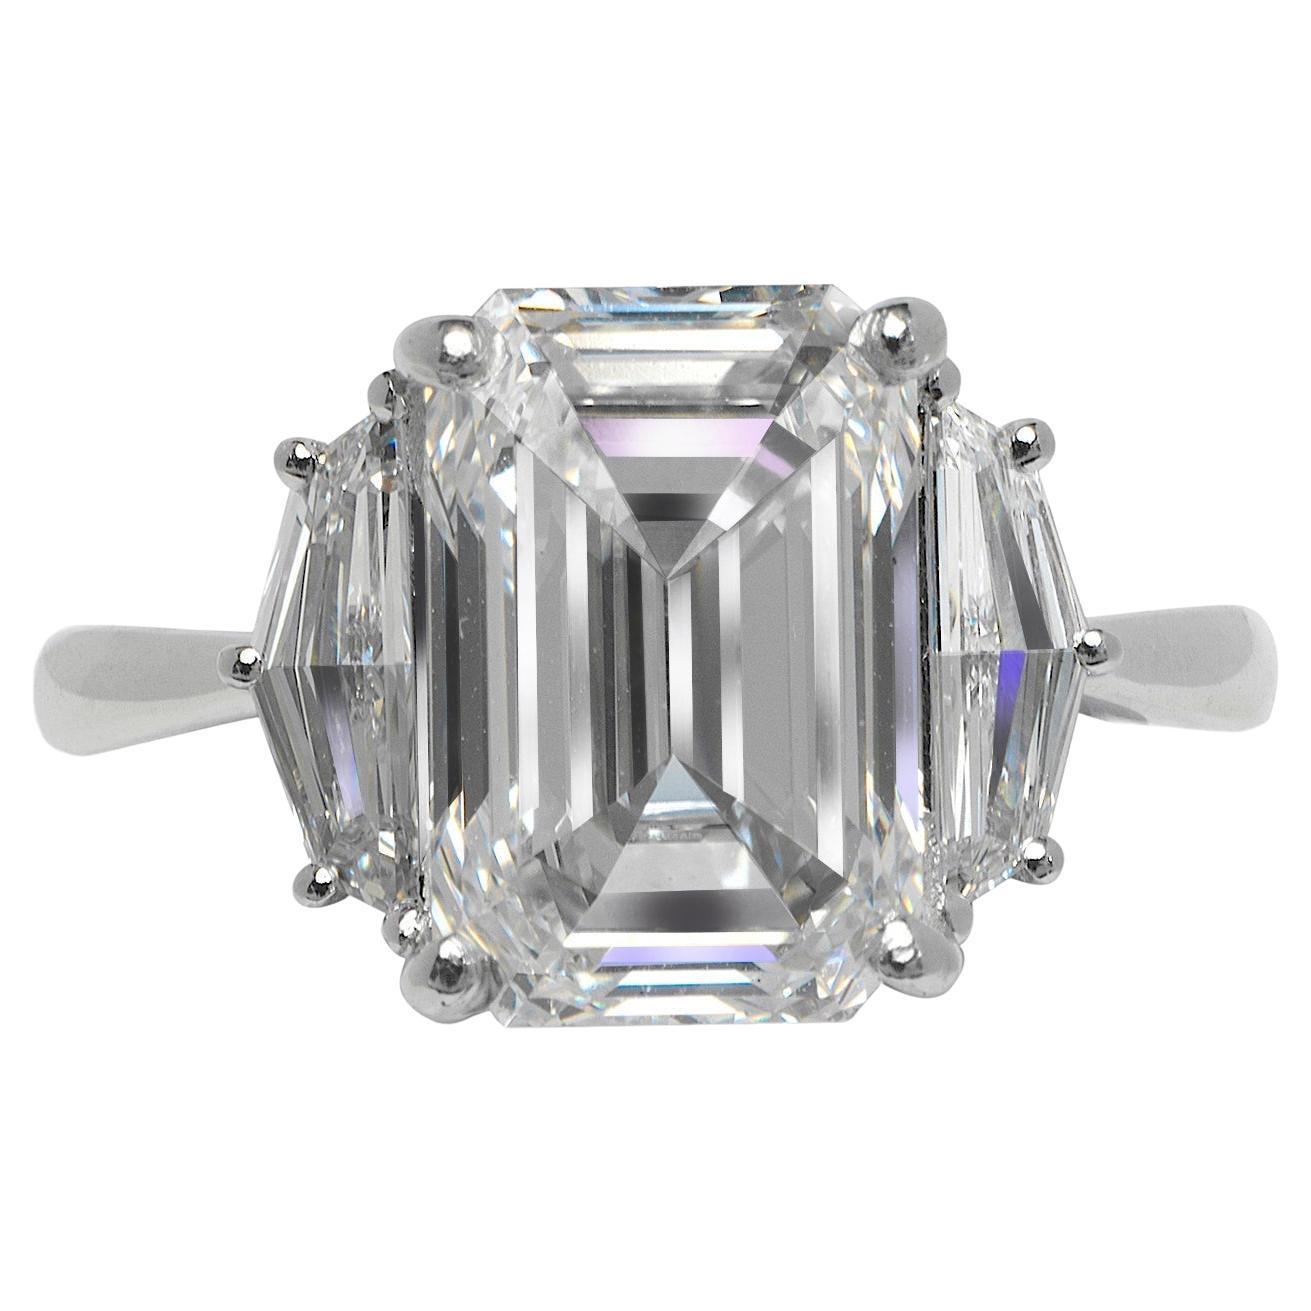 5 Carat Emerald Cut Diamond Engagement Ring GIA Certified F VS1 For Sale